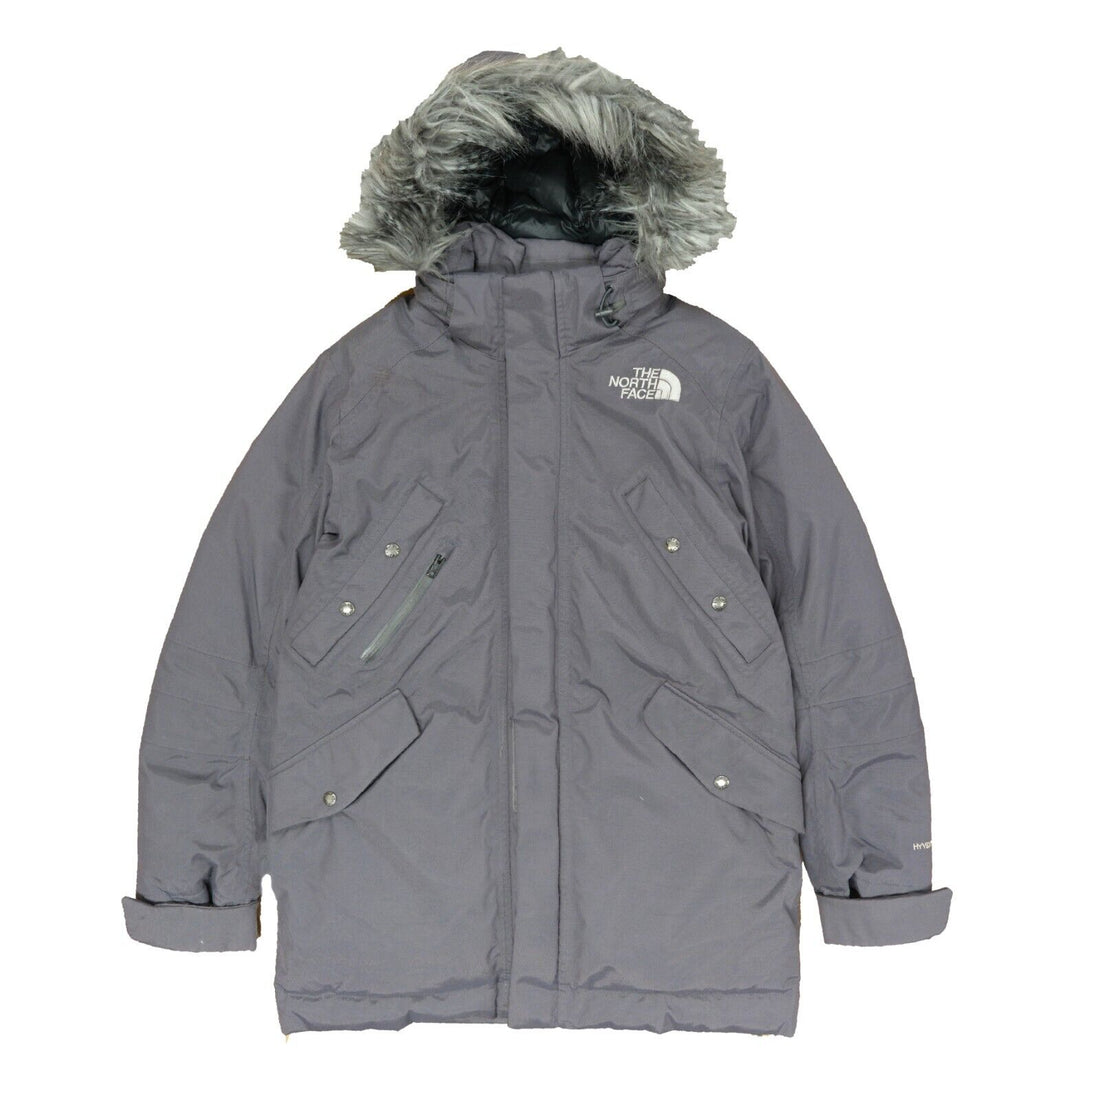 The North Face Parka Coat Jacket Size Small Gray Hyvent Down Insulated –  Throwback Vault